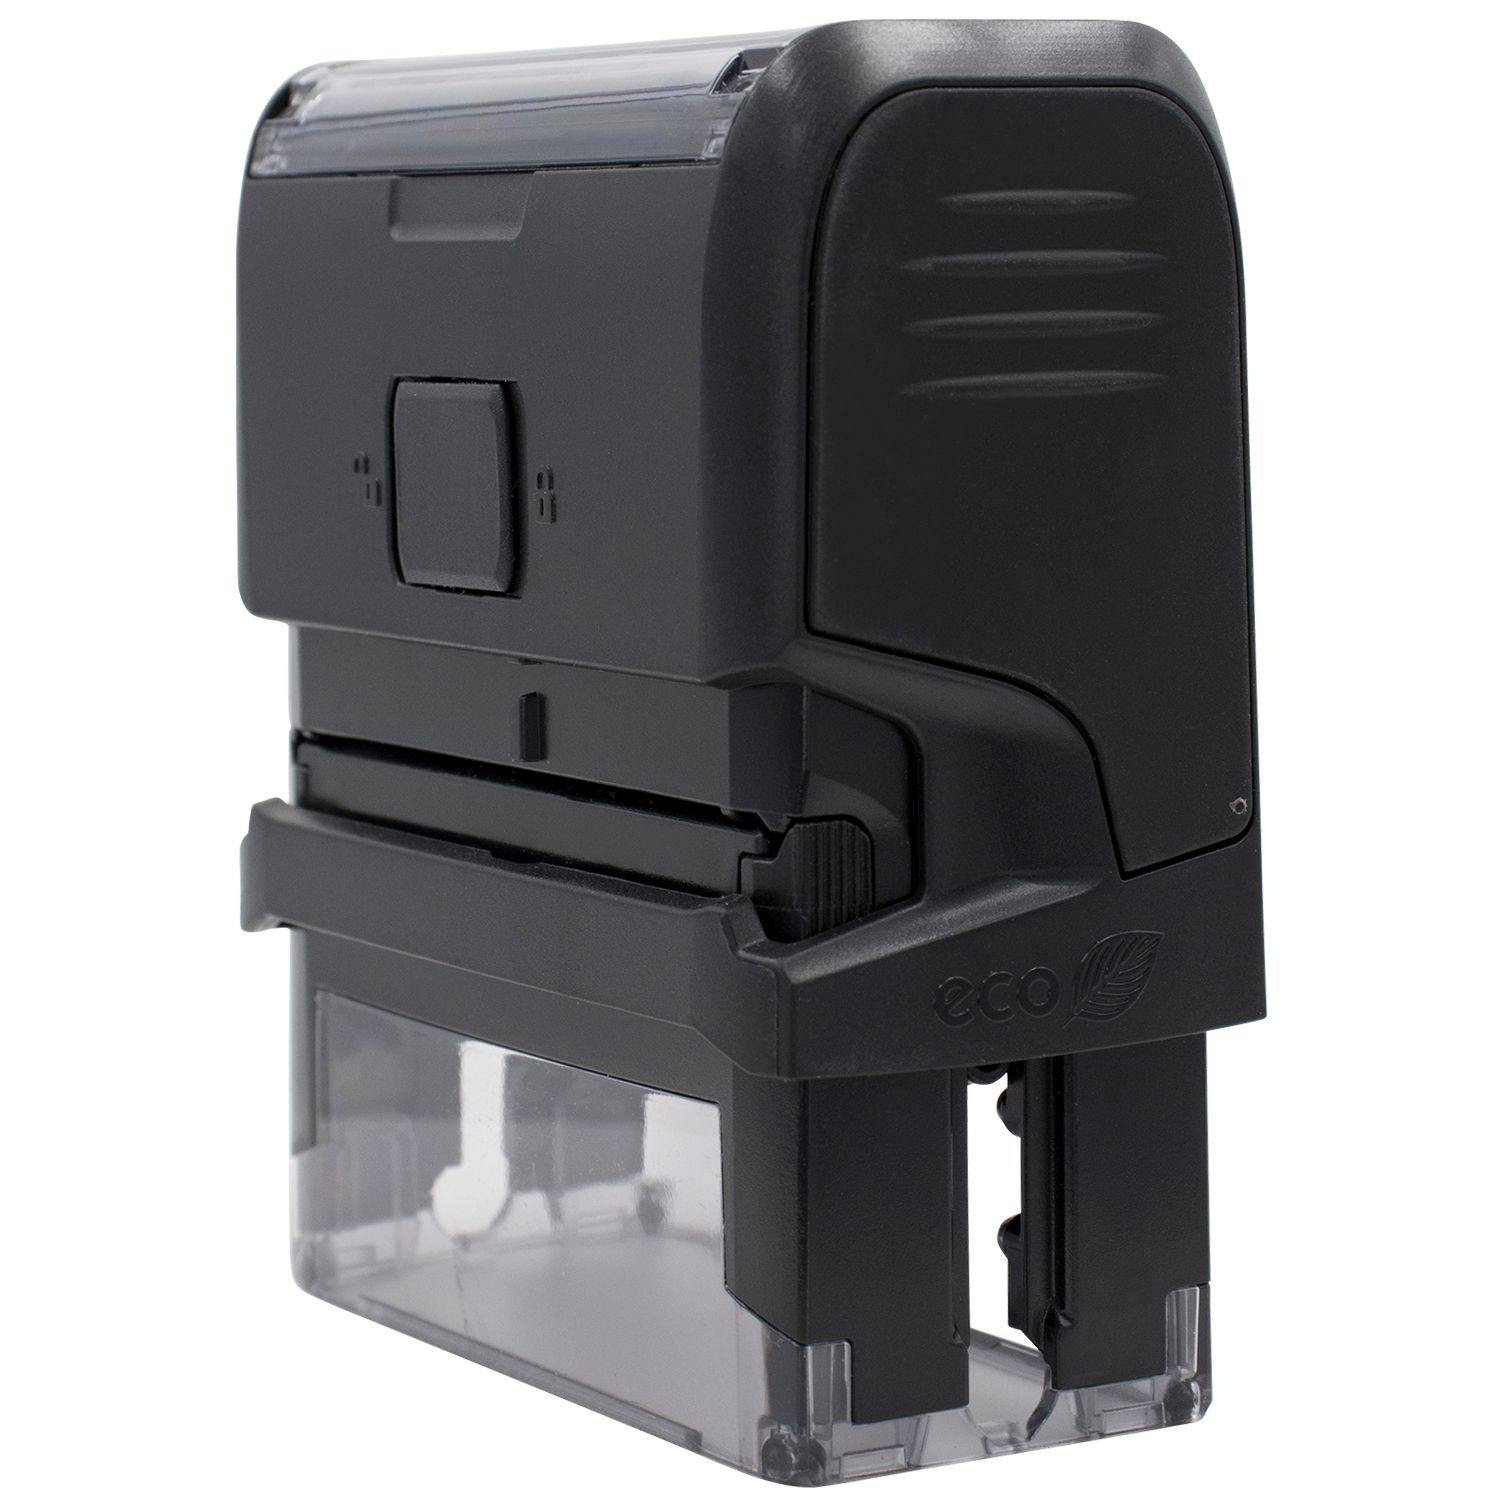 Self Inking Expert Witness Stamp - Engineer Seal Stamps - Brand_Trodat, Impression Size_Small, Stamp Type_Self-Inking Stamp, Type of Use_Legal